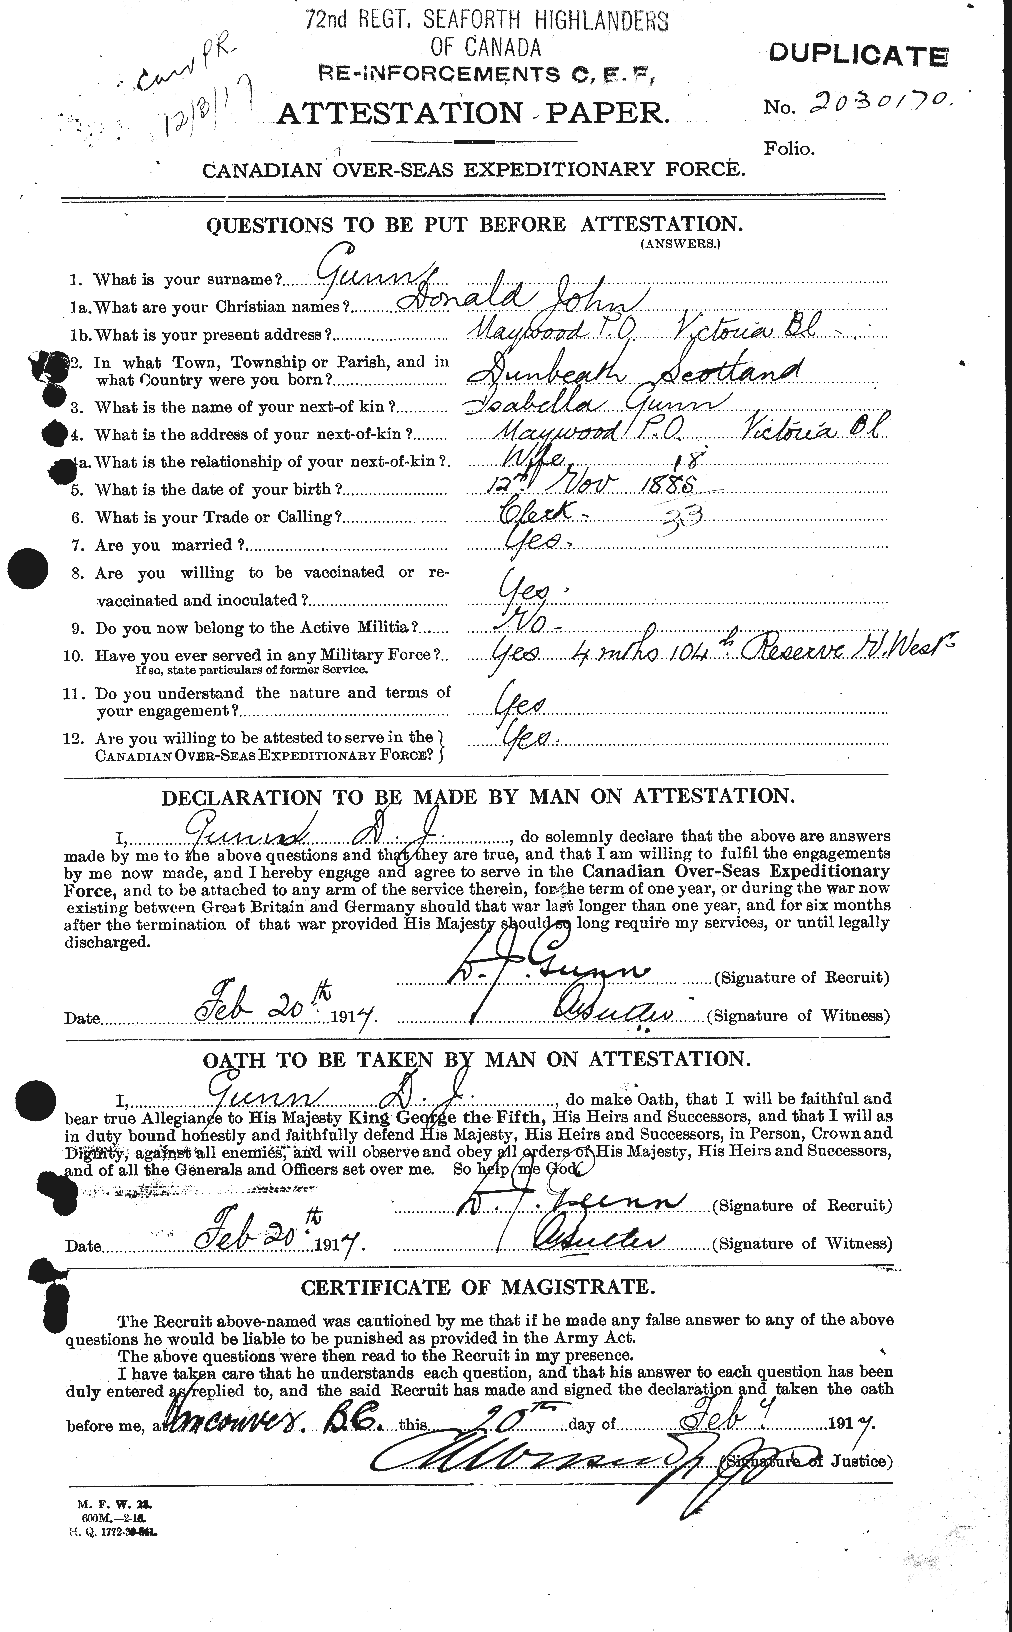 Personnel Records of the First World War - CEF 368033a